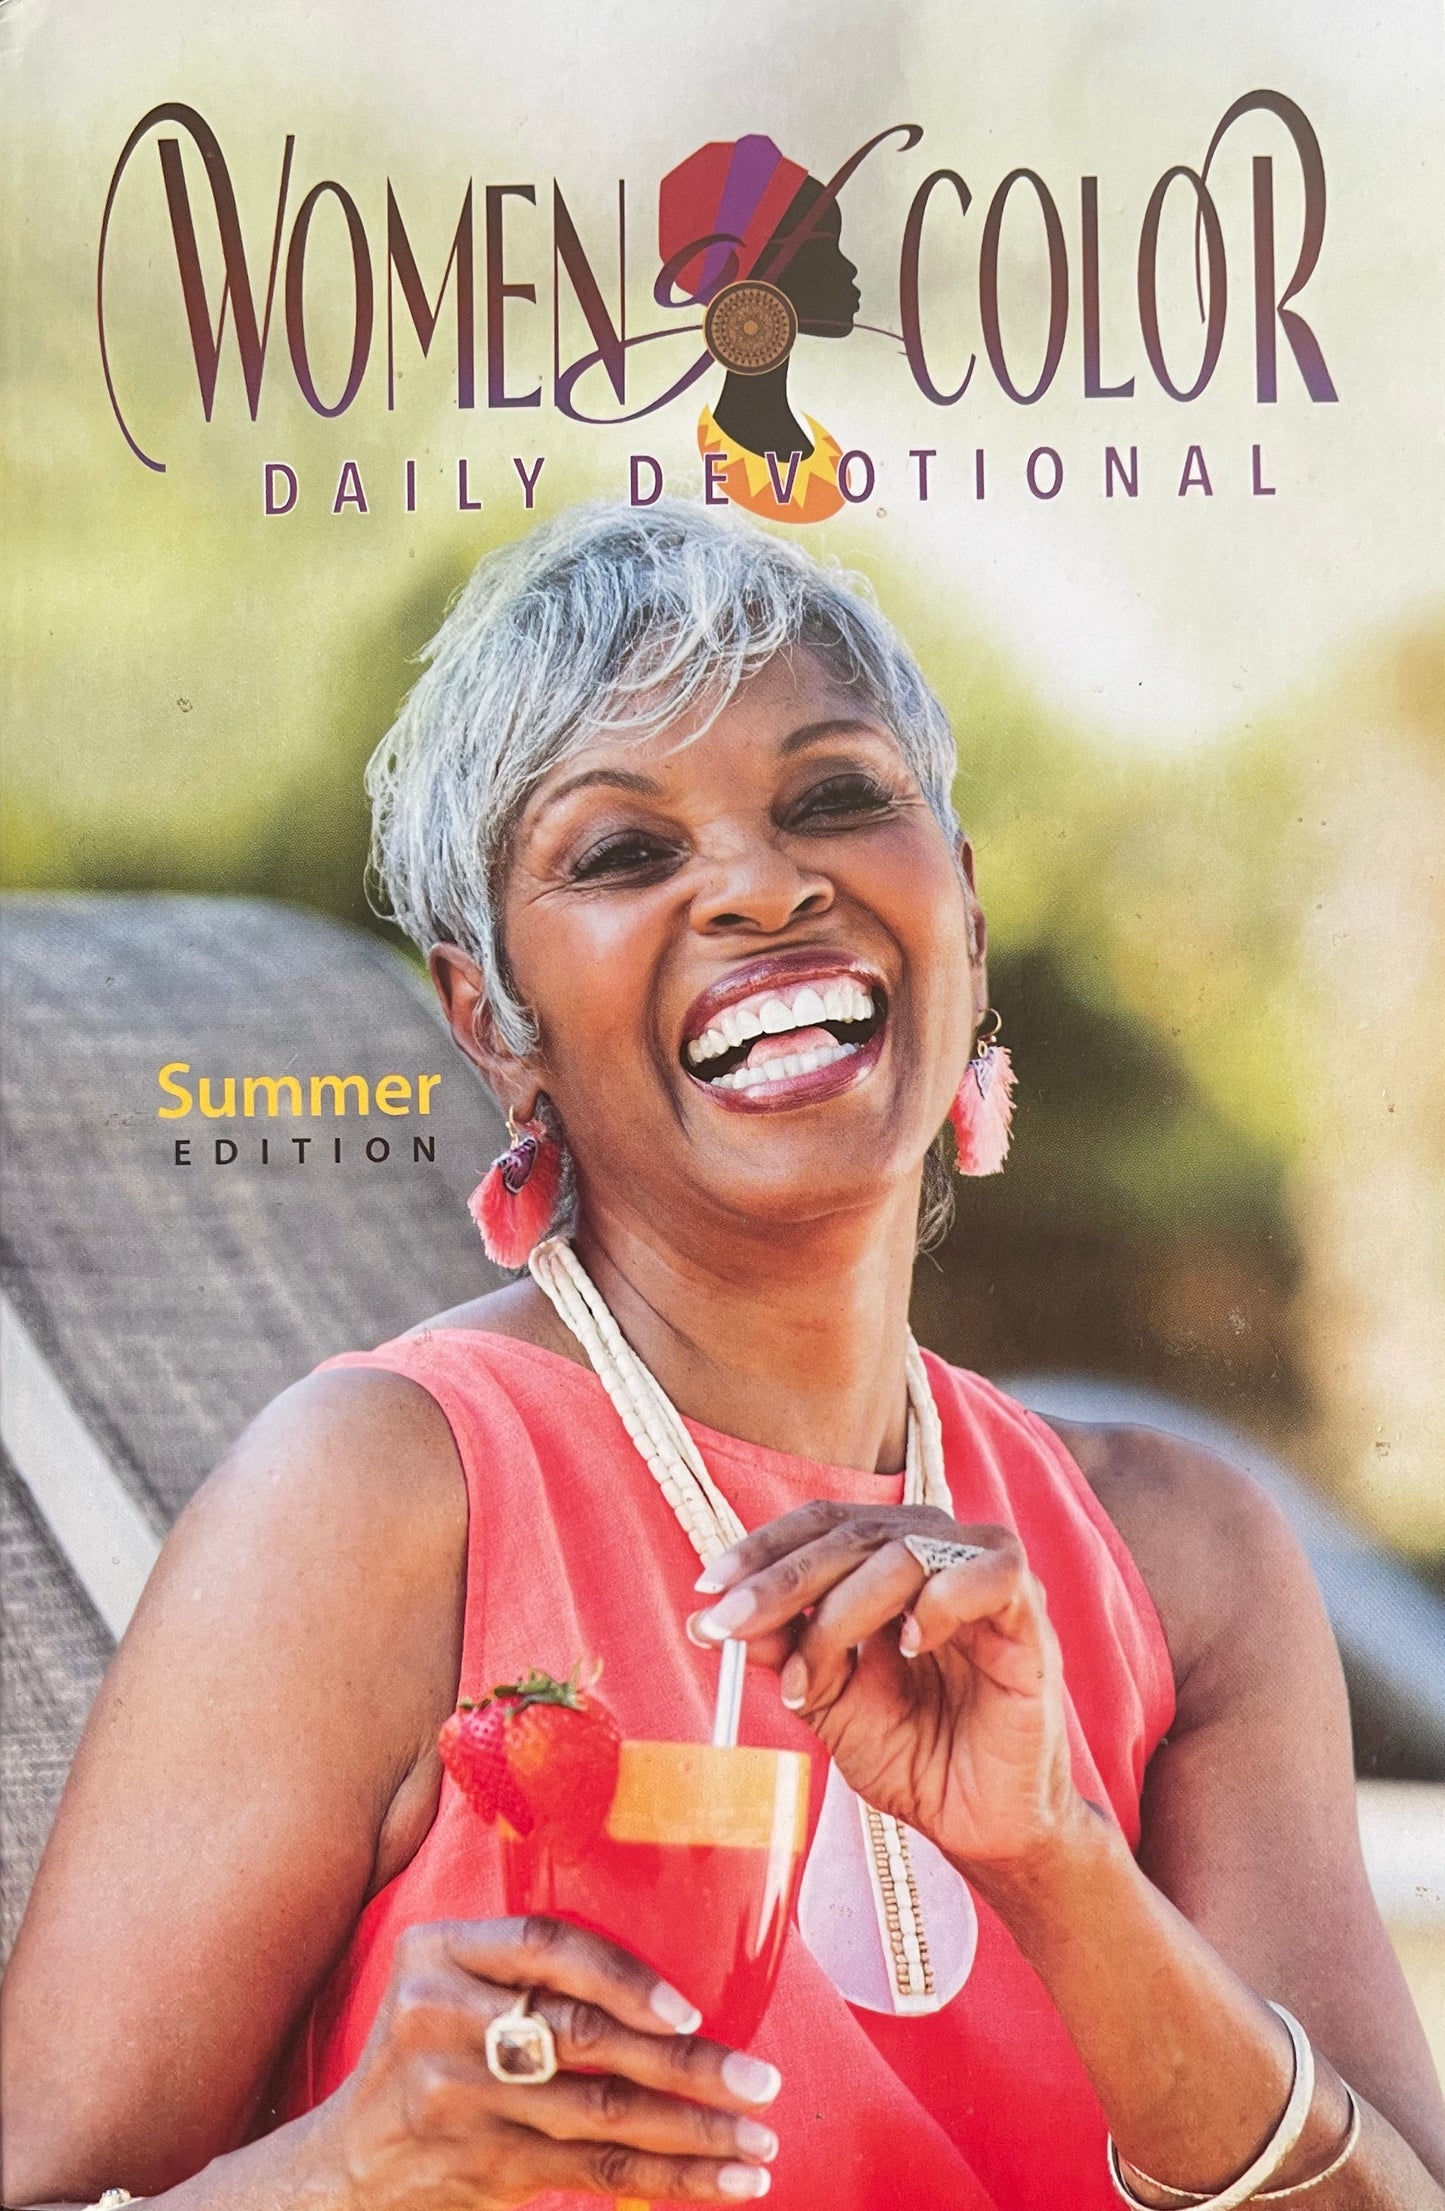 ALL of the Women of Color Daily Devotionals in one Set x4